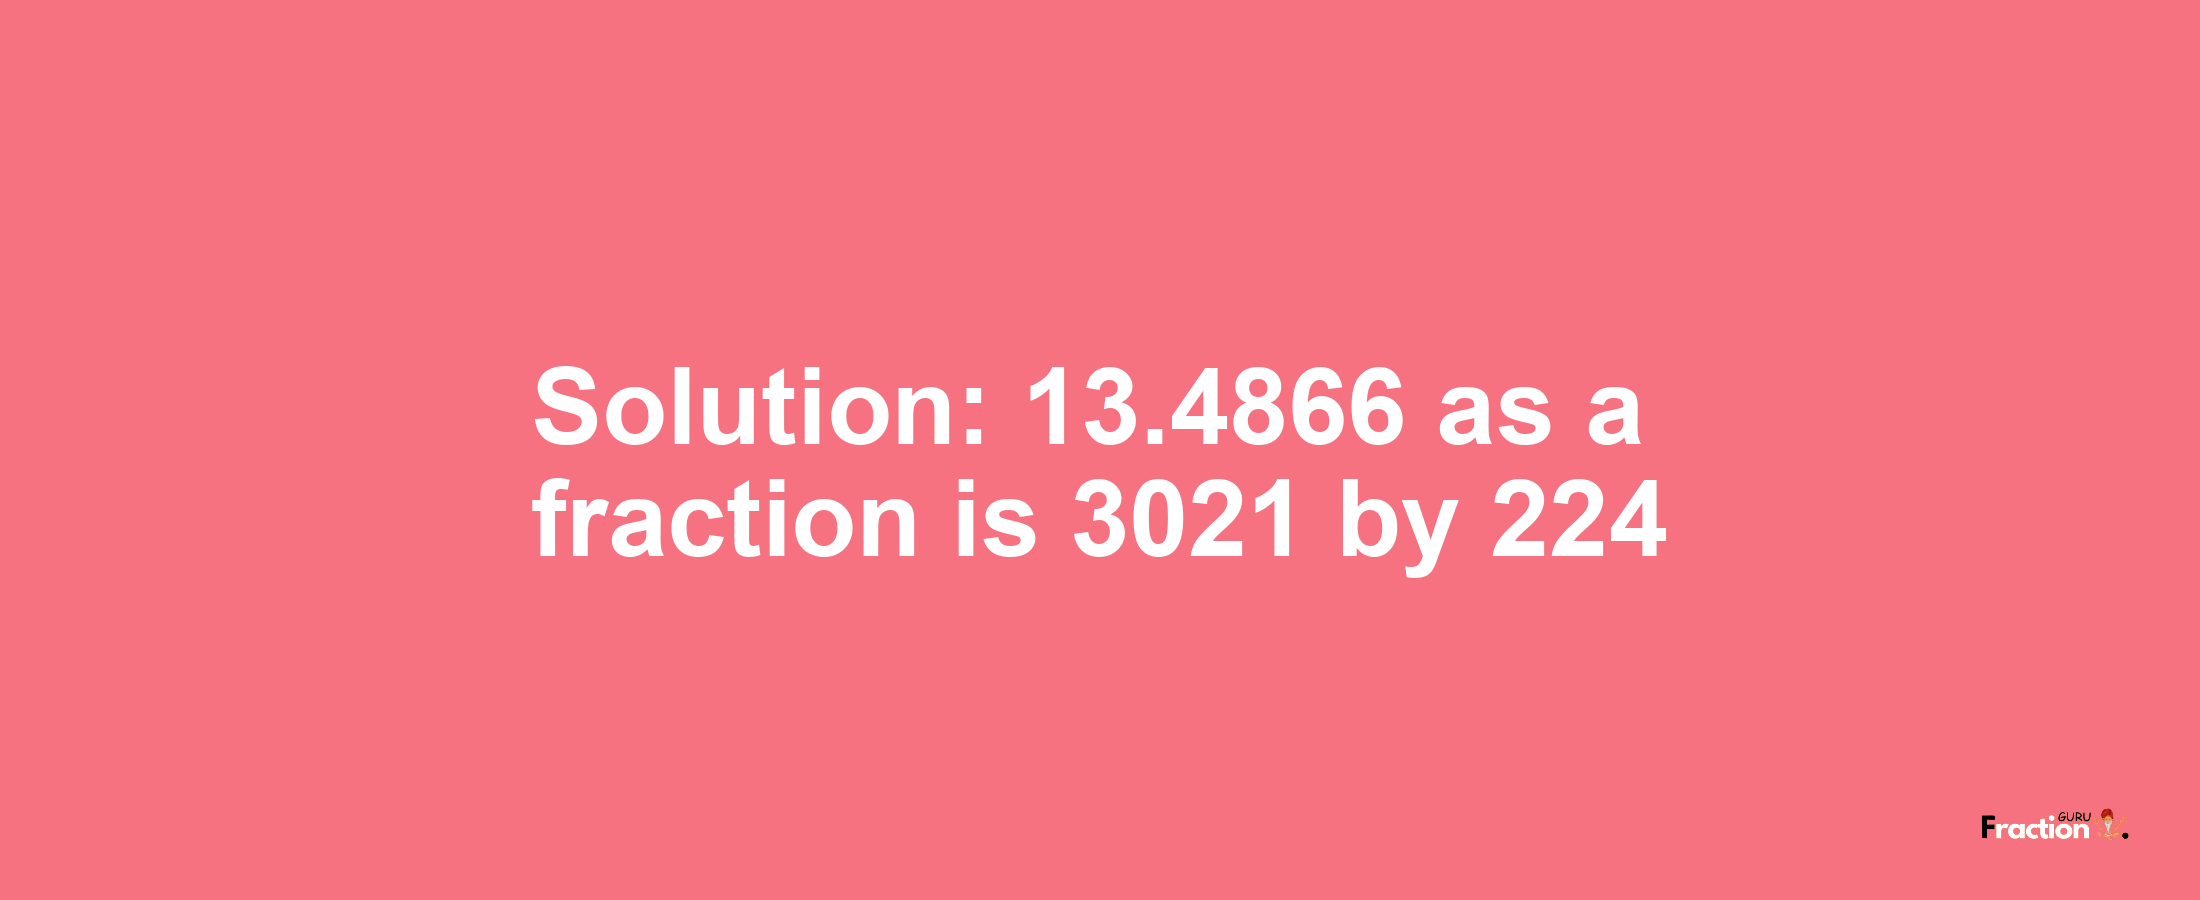 Solution:13.4866 as a fraction is 3021/224